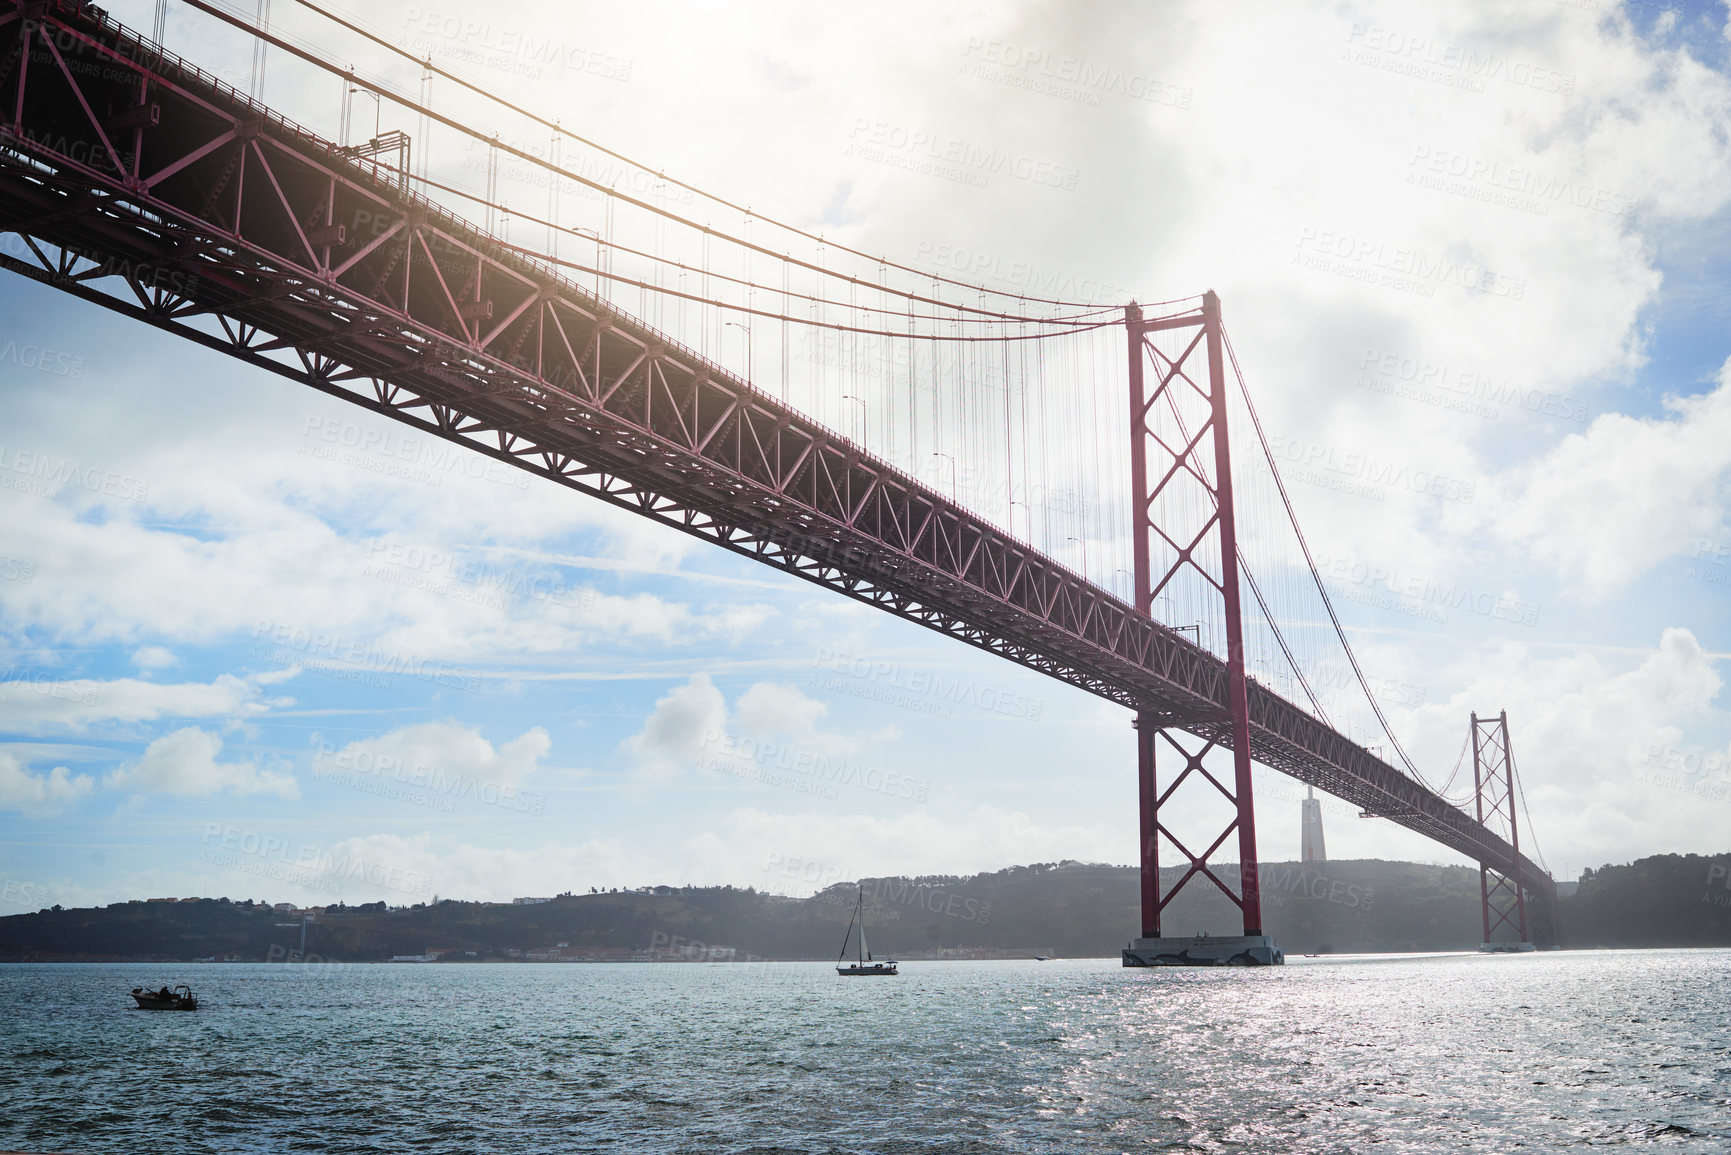 Buy stock photo Low angle shot of a massive bridge over the ocean with clouds in the background outside during the day